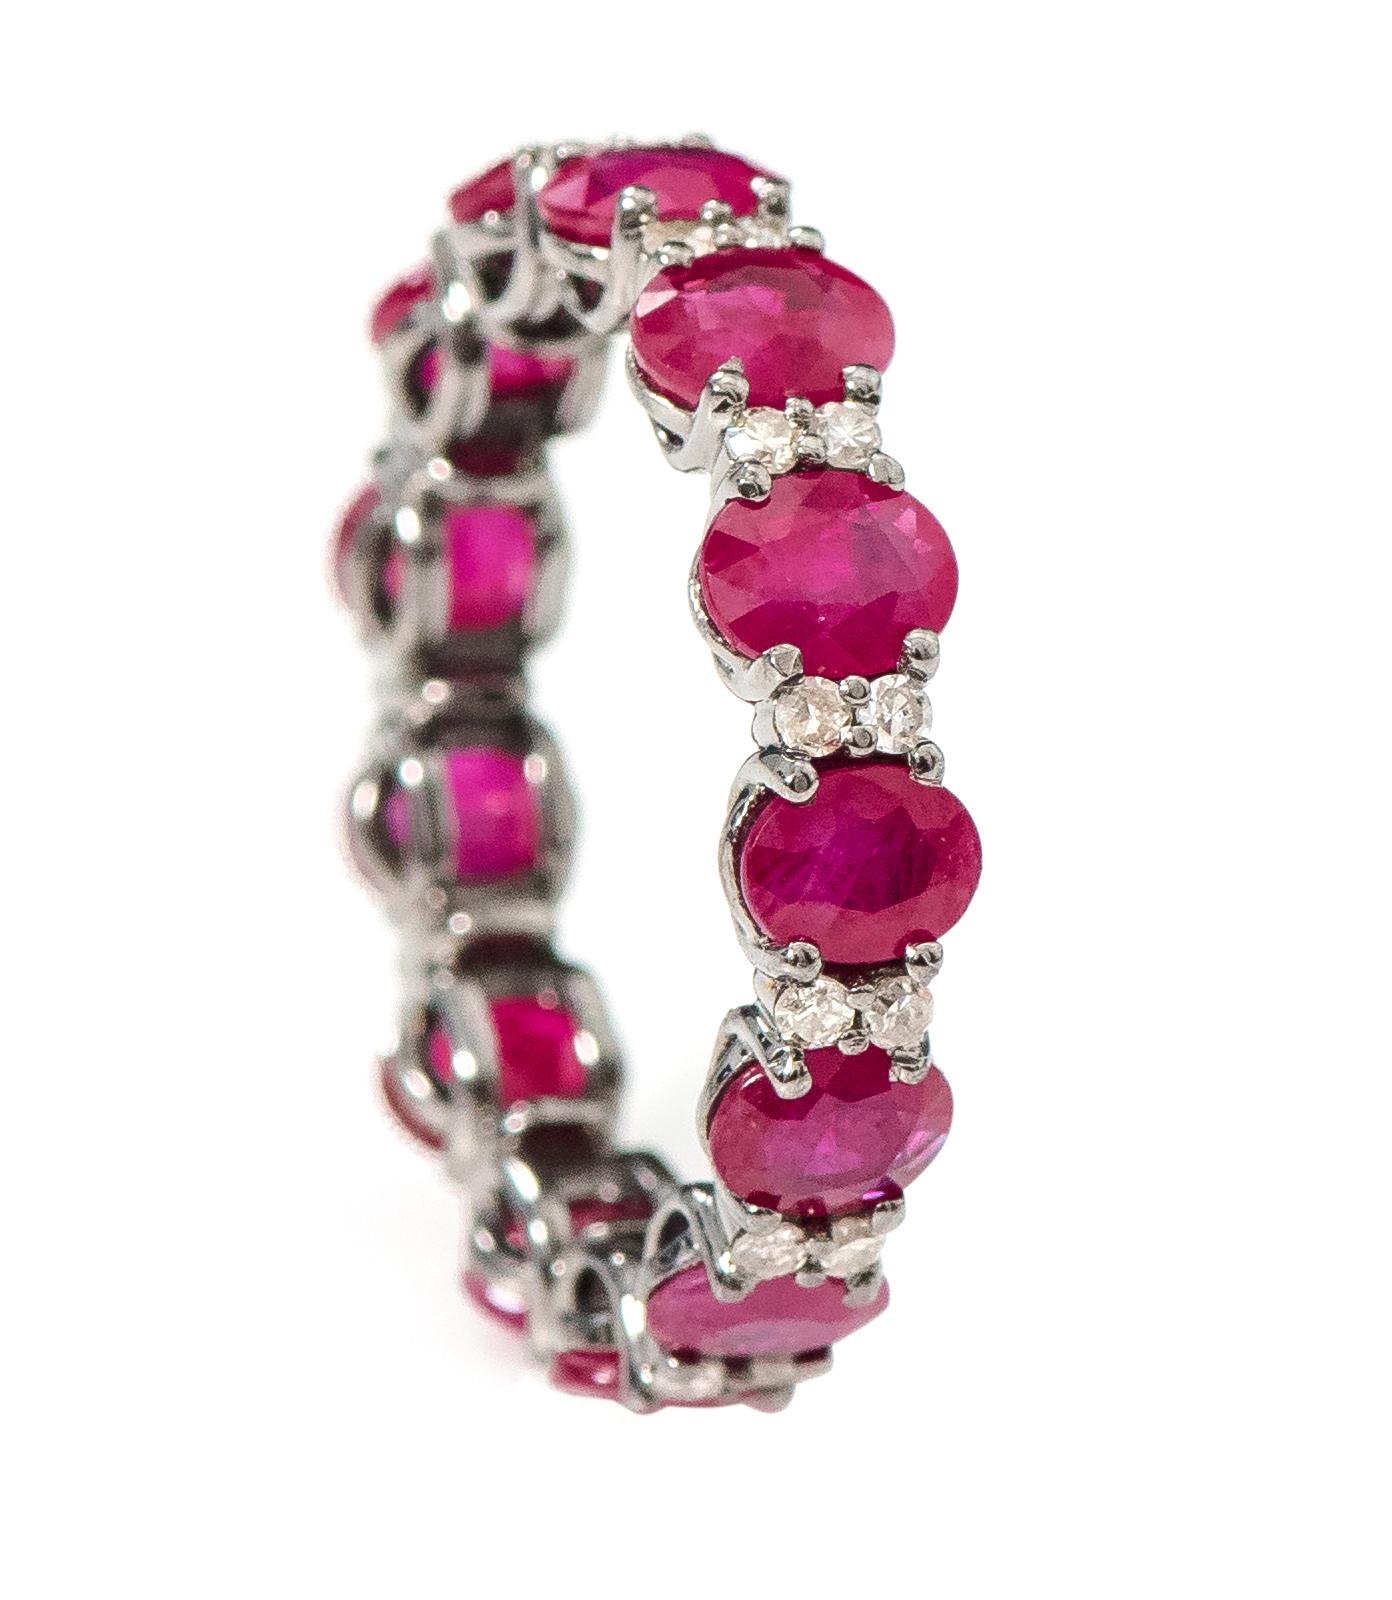 5.38 Carat Oval-Cut Ruby and Diamond Eternity Band Ring in Victorian Style
 
This Victorian period art-deco style enchanting crimson ruby and diamond band is magnificent. The solitaire horizontally placed oval shape ruby in grain prong setting is